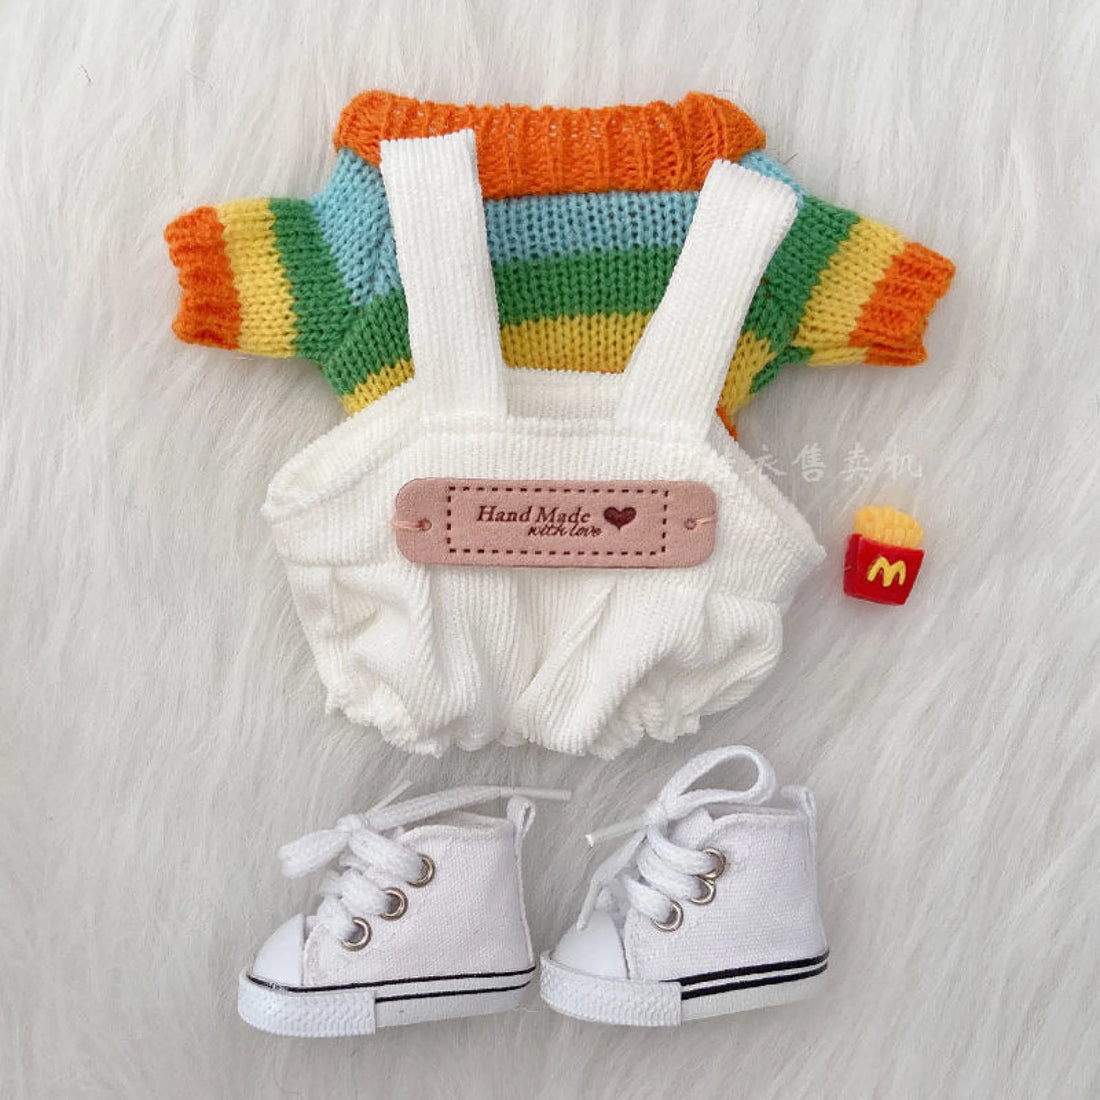 20Cm Cotton Doll Plush Clothes Cute Rainbow Outfit For Dolls(Outfit Only) Full Set